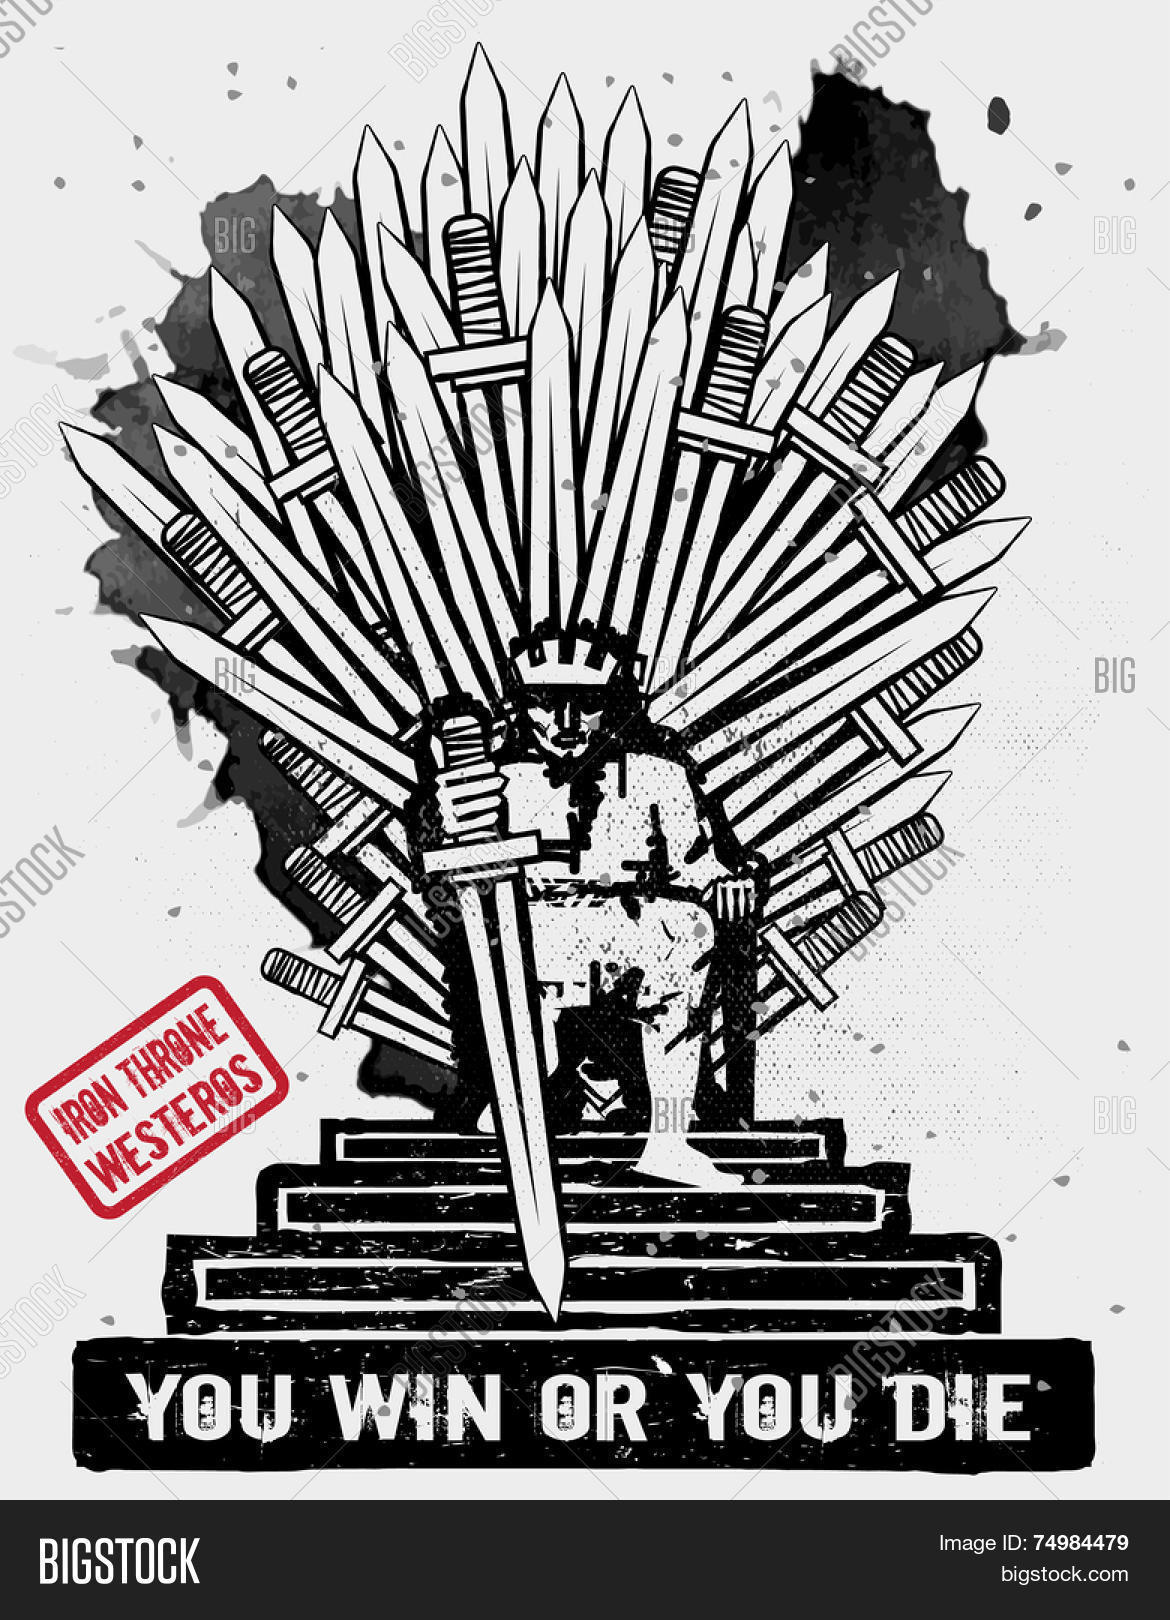 Iron throne game of thrones svg